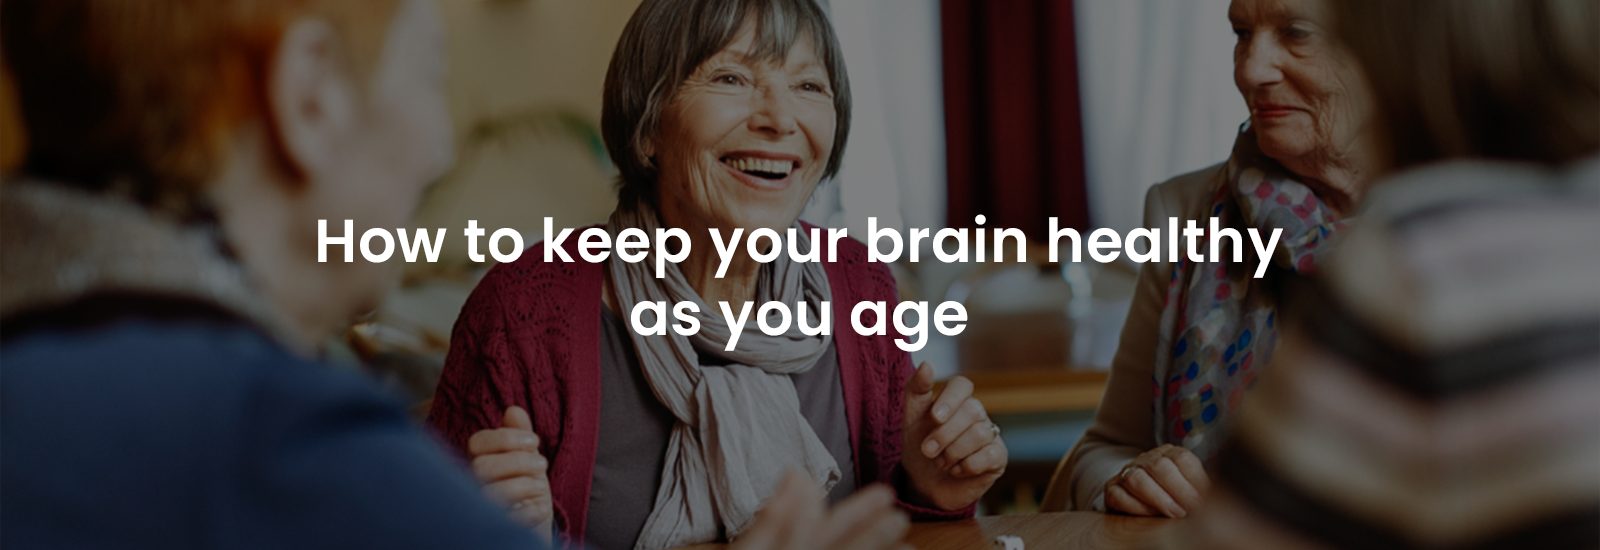 How to Keep Your Brain Healthy as You Age | Banner Image